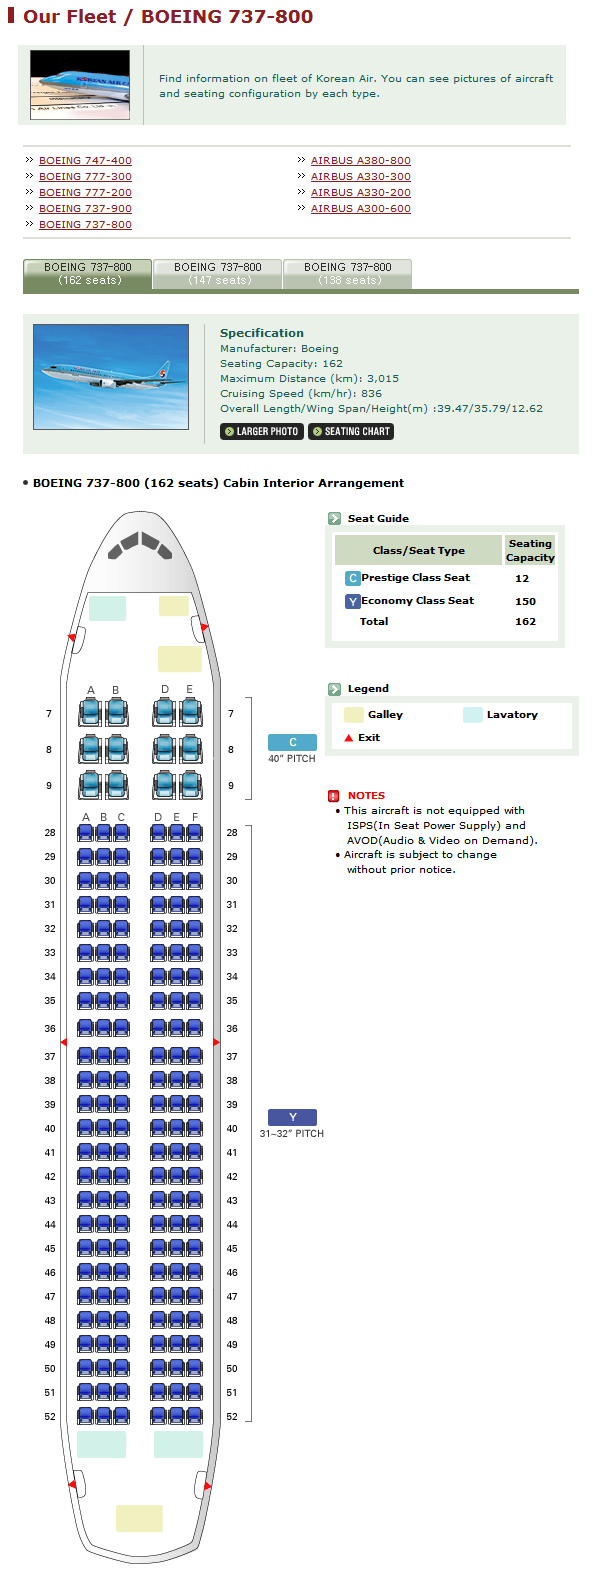 KOREAN AIR Airlines Aircraft Seatmaps Airline Seating Maps and Layouts